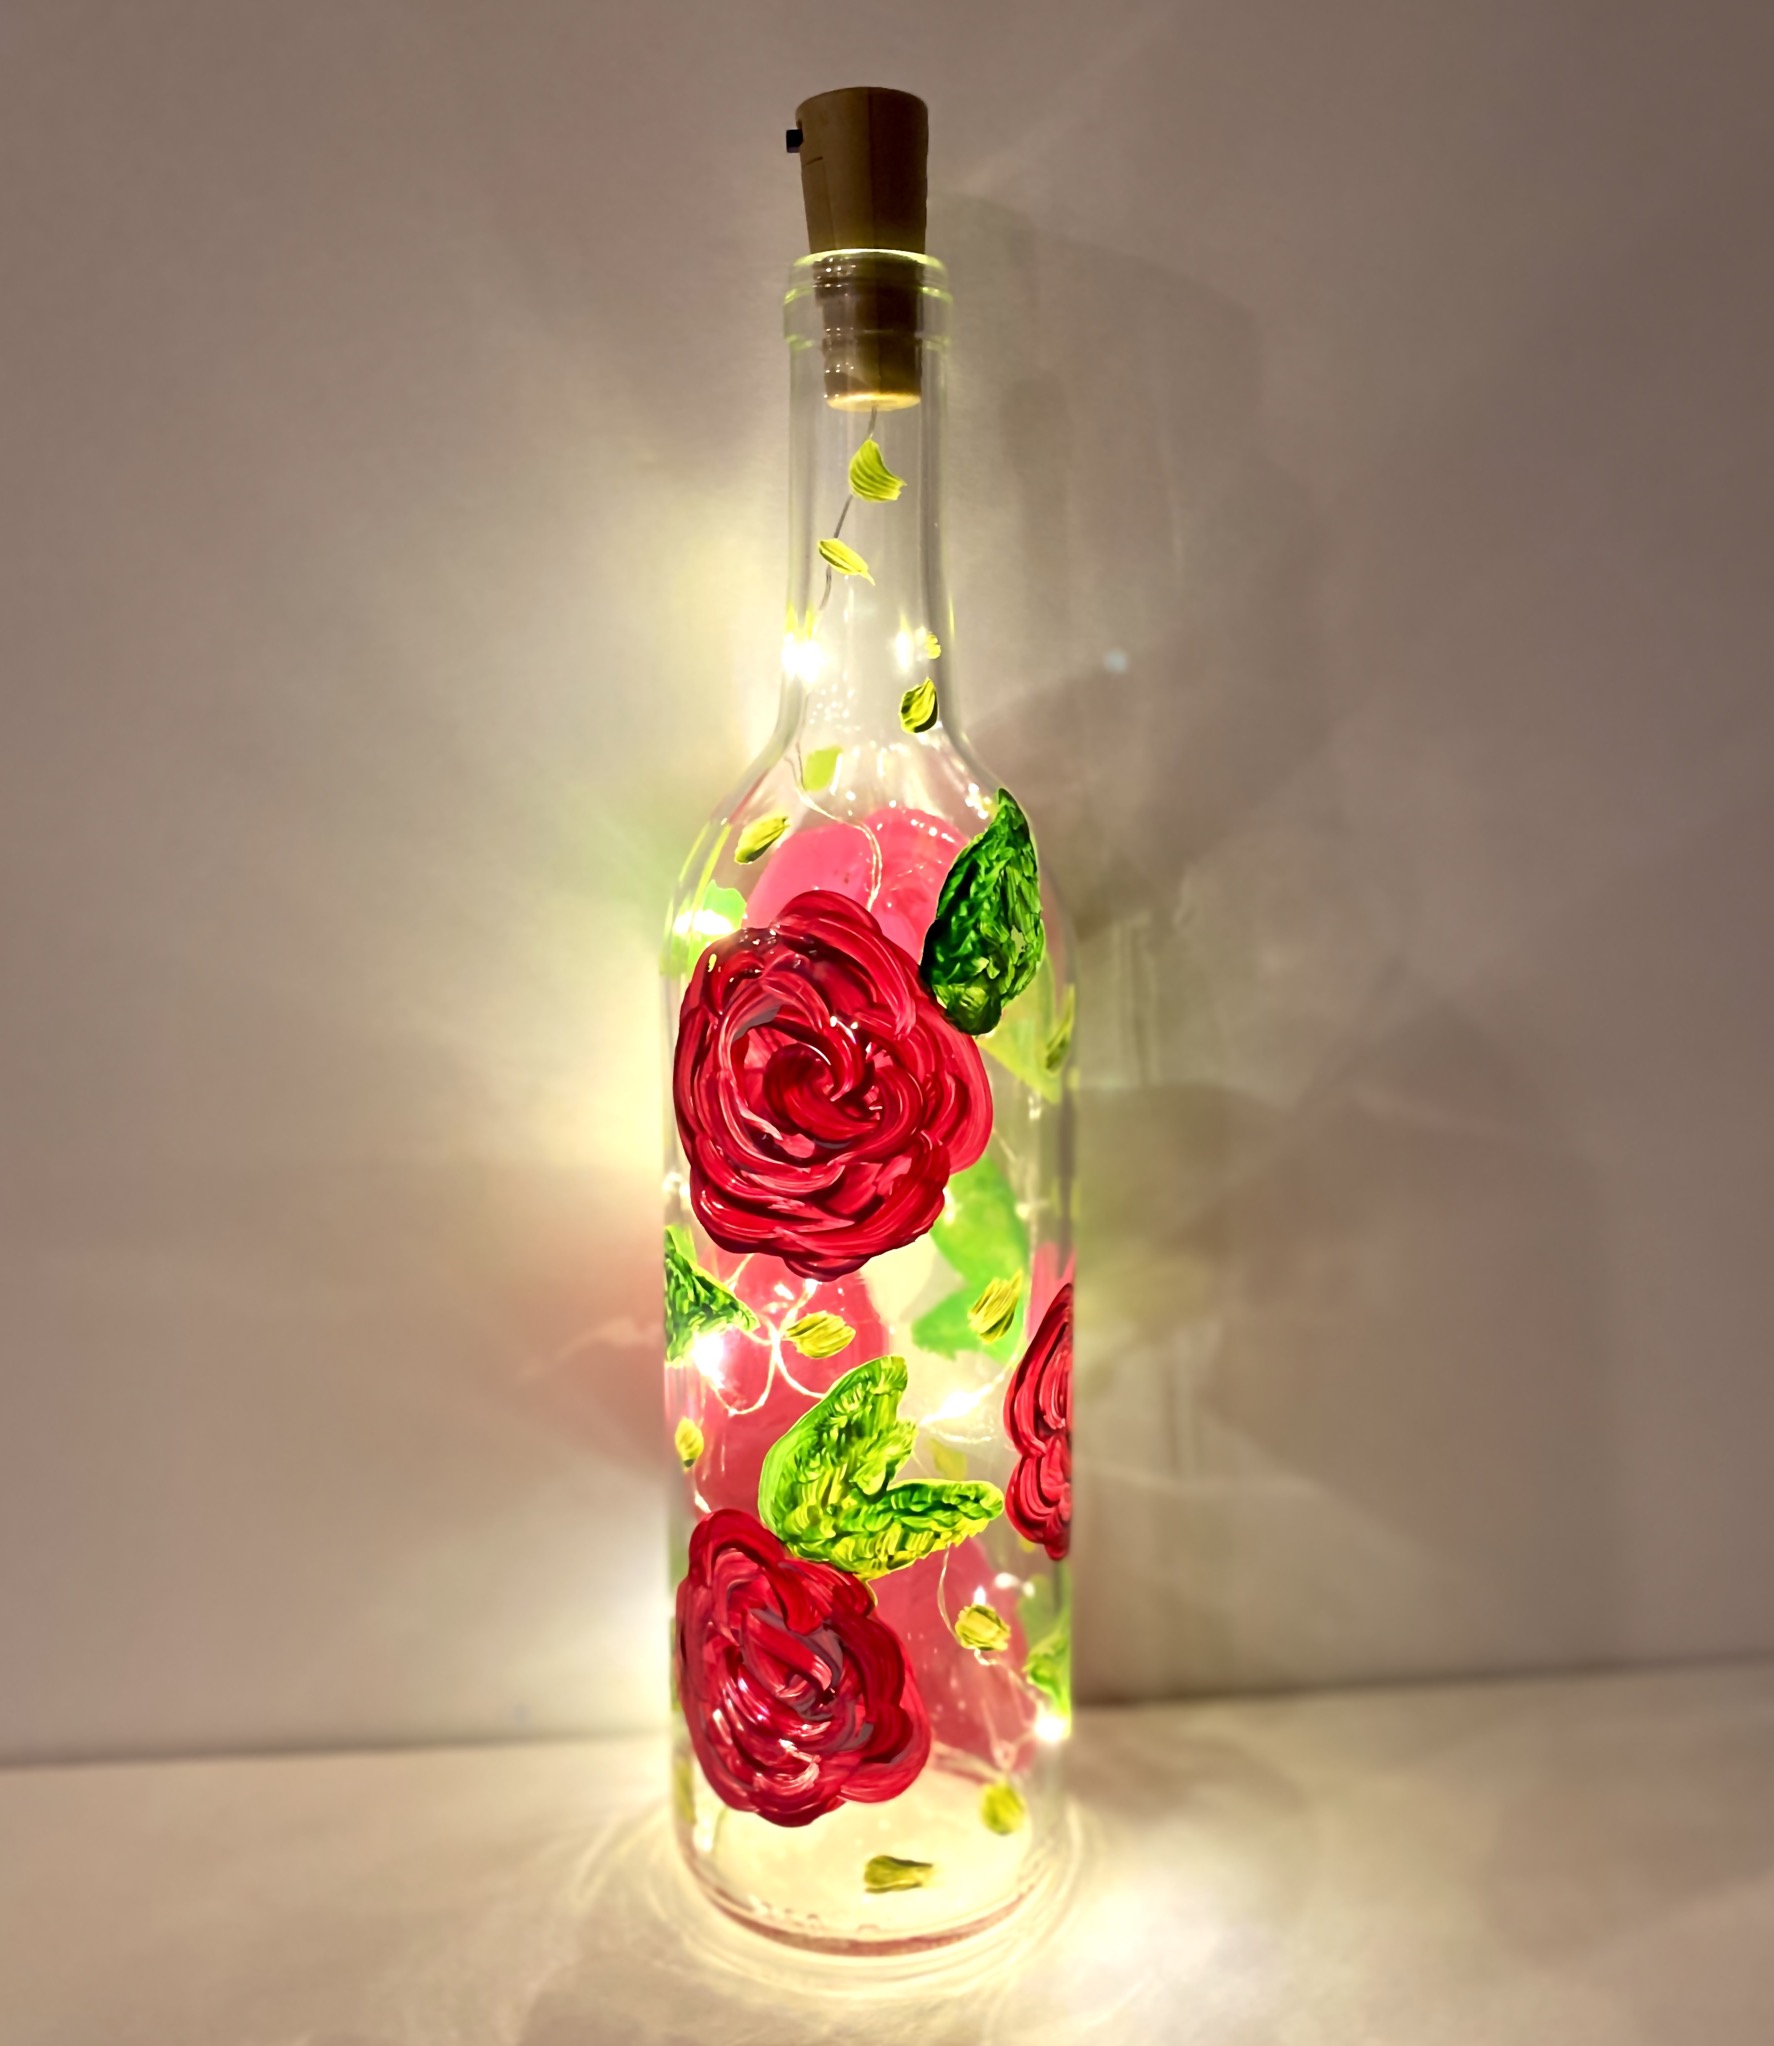 A Easy Breezy Rose Bud Wine Bottle With Fairy Lights experience project by Yaymaker